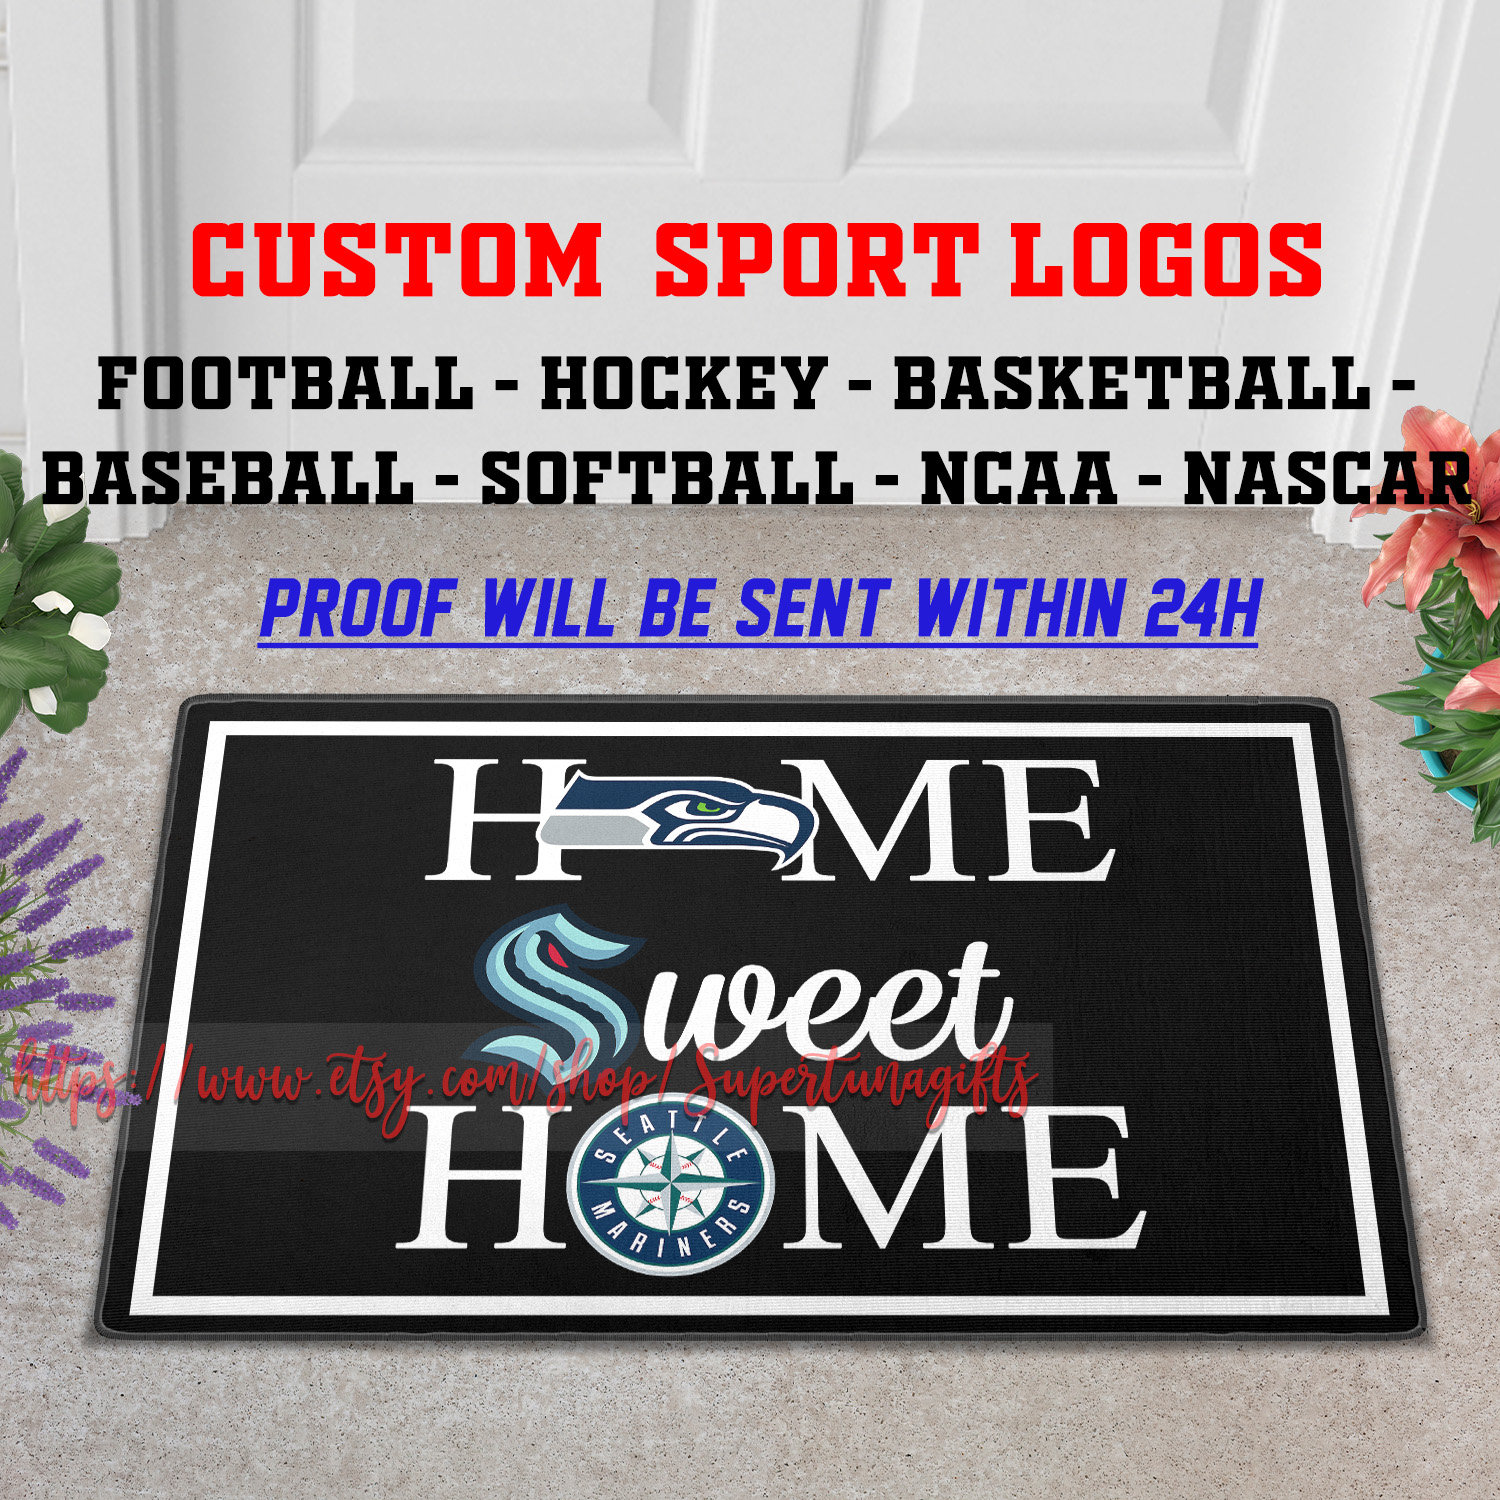 Home Sweet Home - Family Personalized Custom Home Decor Decorative Mat -  Pawfect House ™